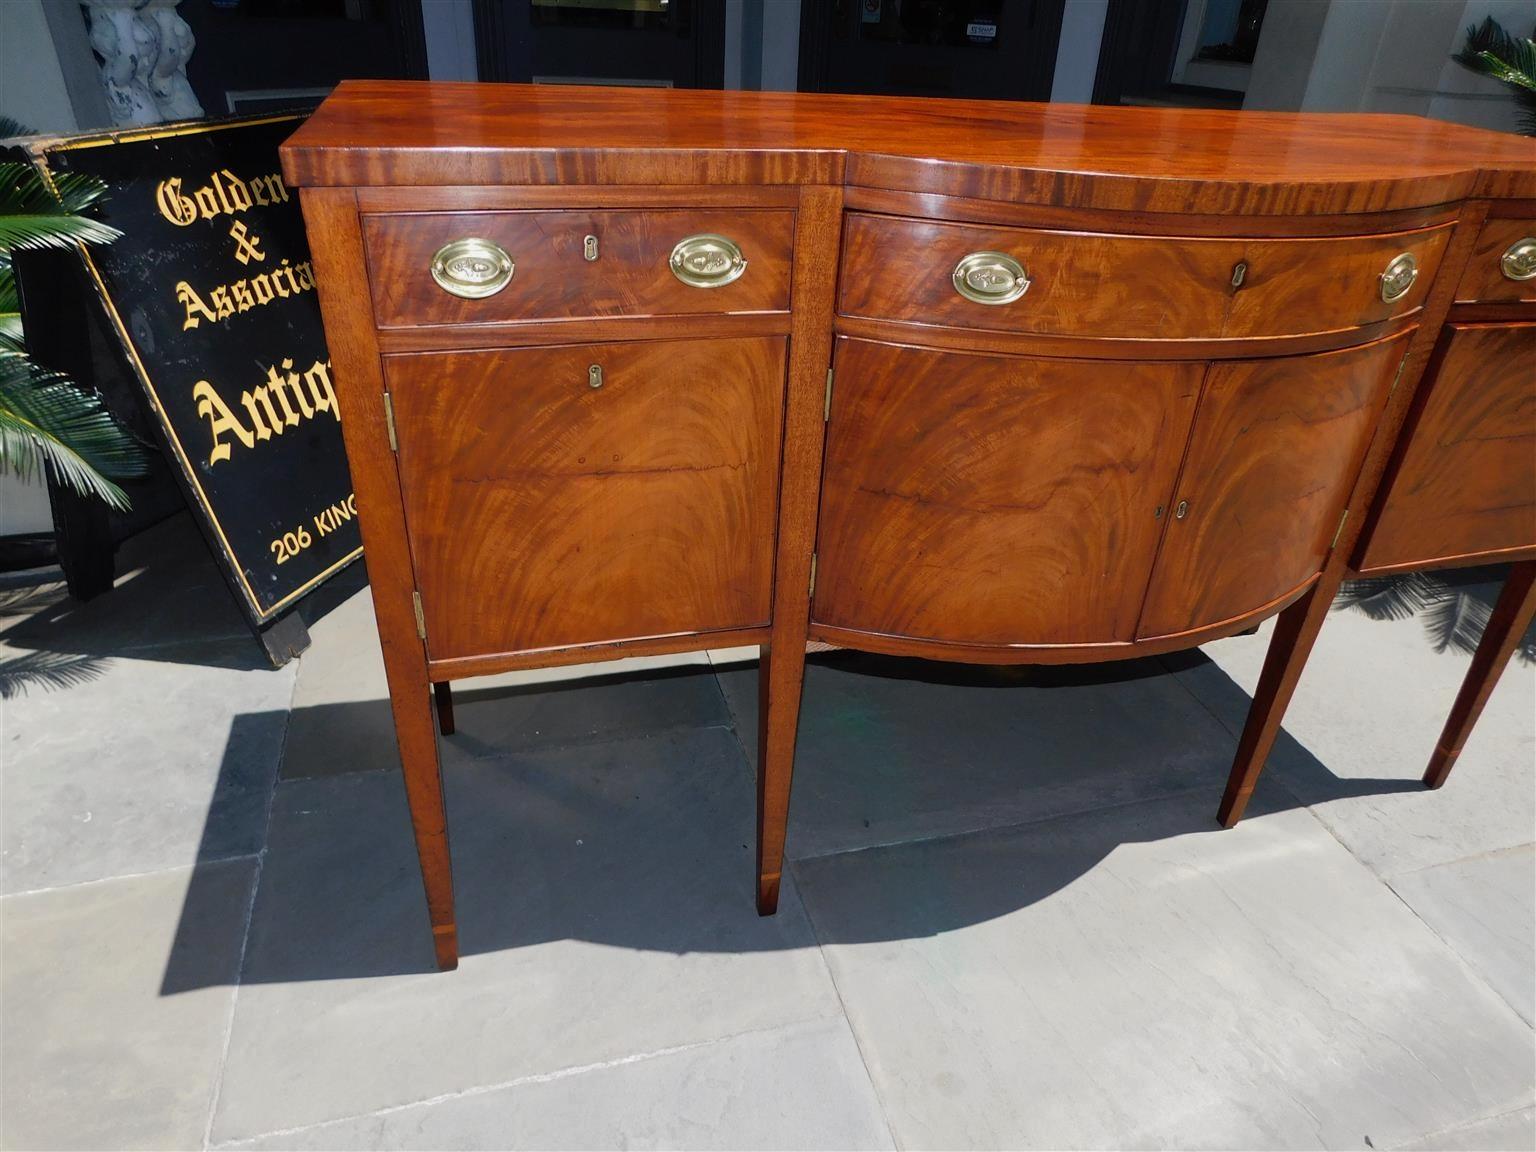 Early 19th Century American Federal Mahogany Bow Front Sideboard with Tapered Cuffed Legs, C. 1810 For Sale